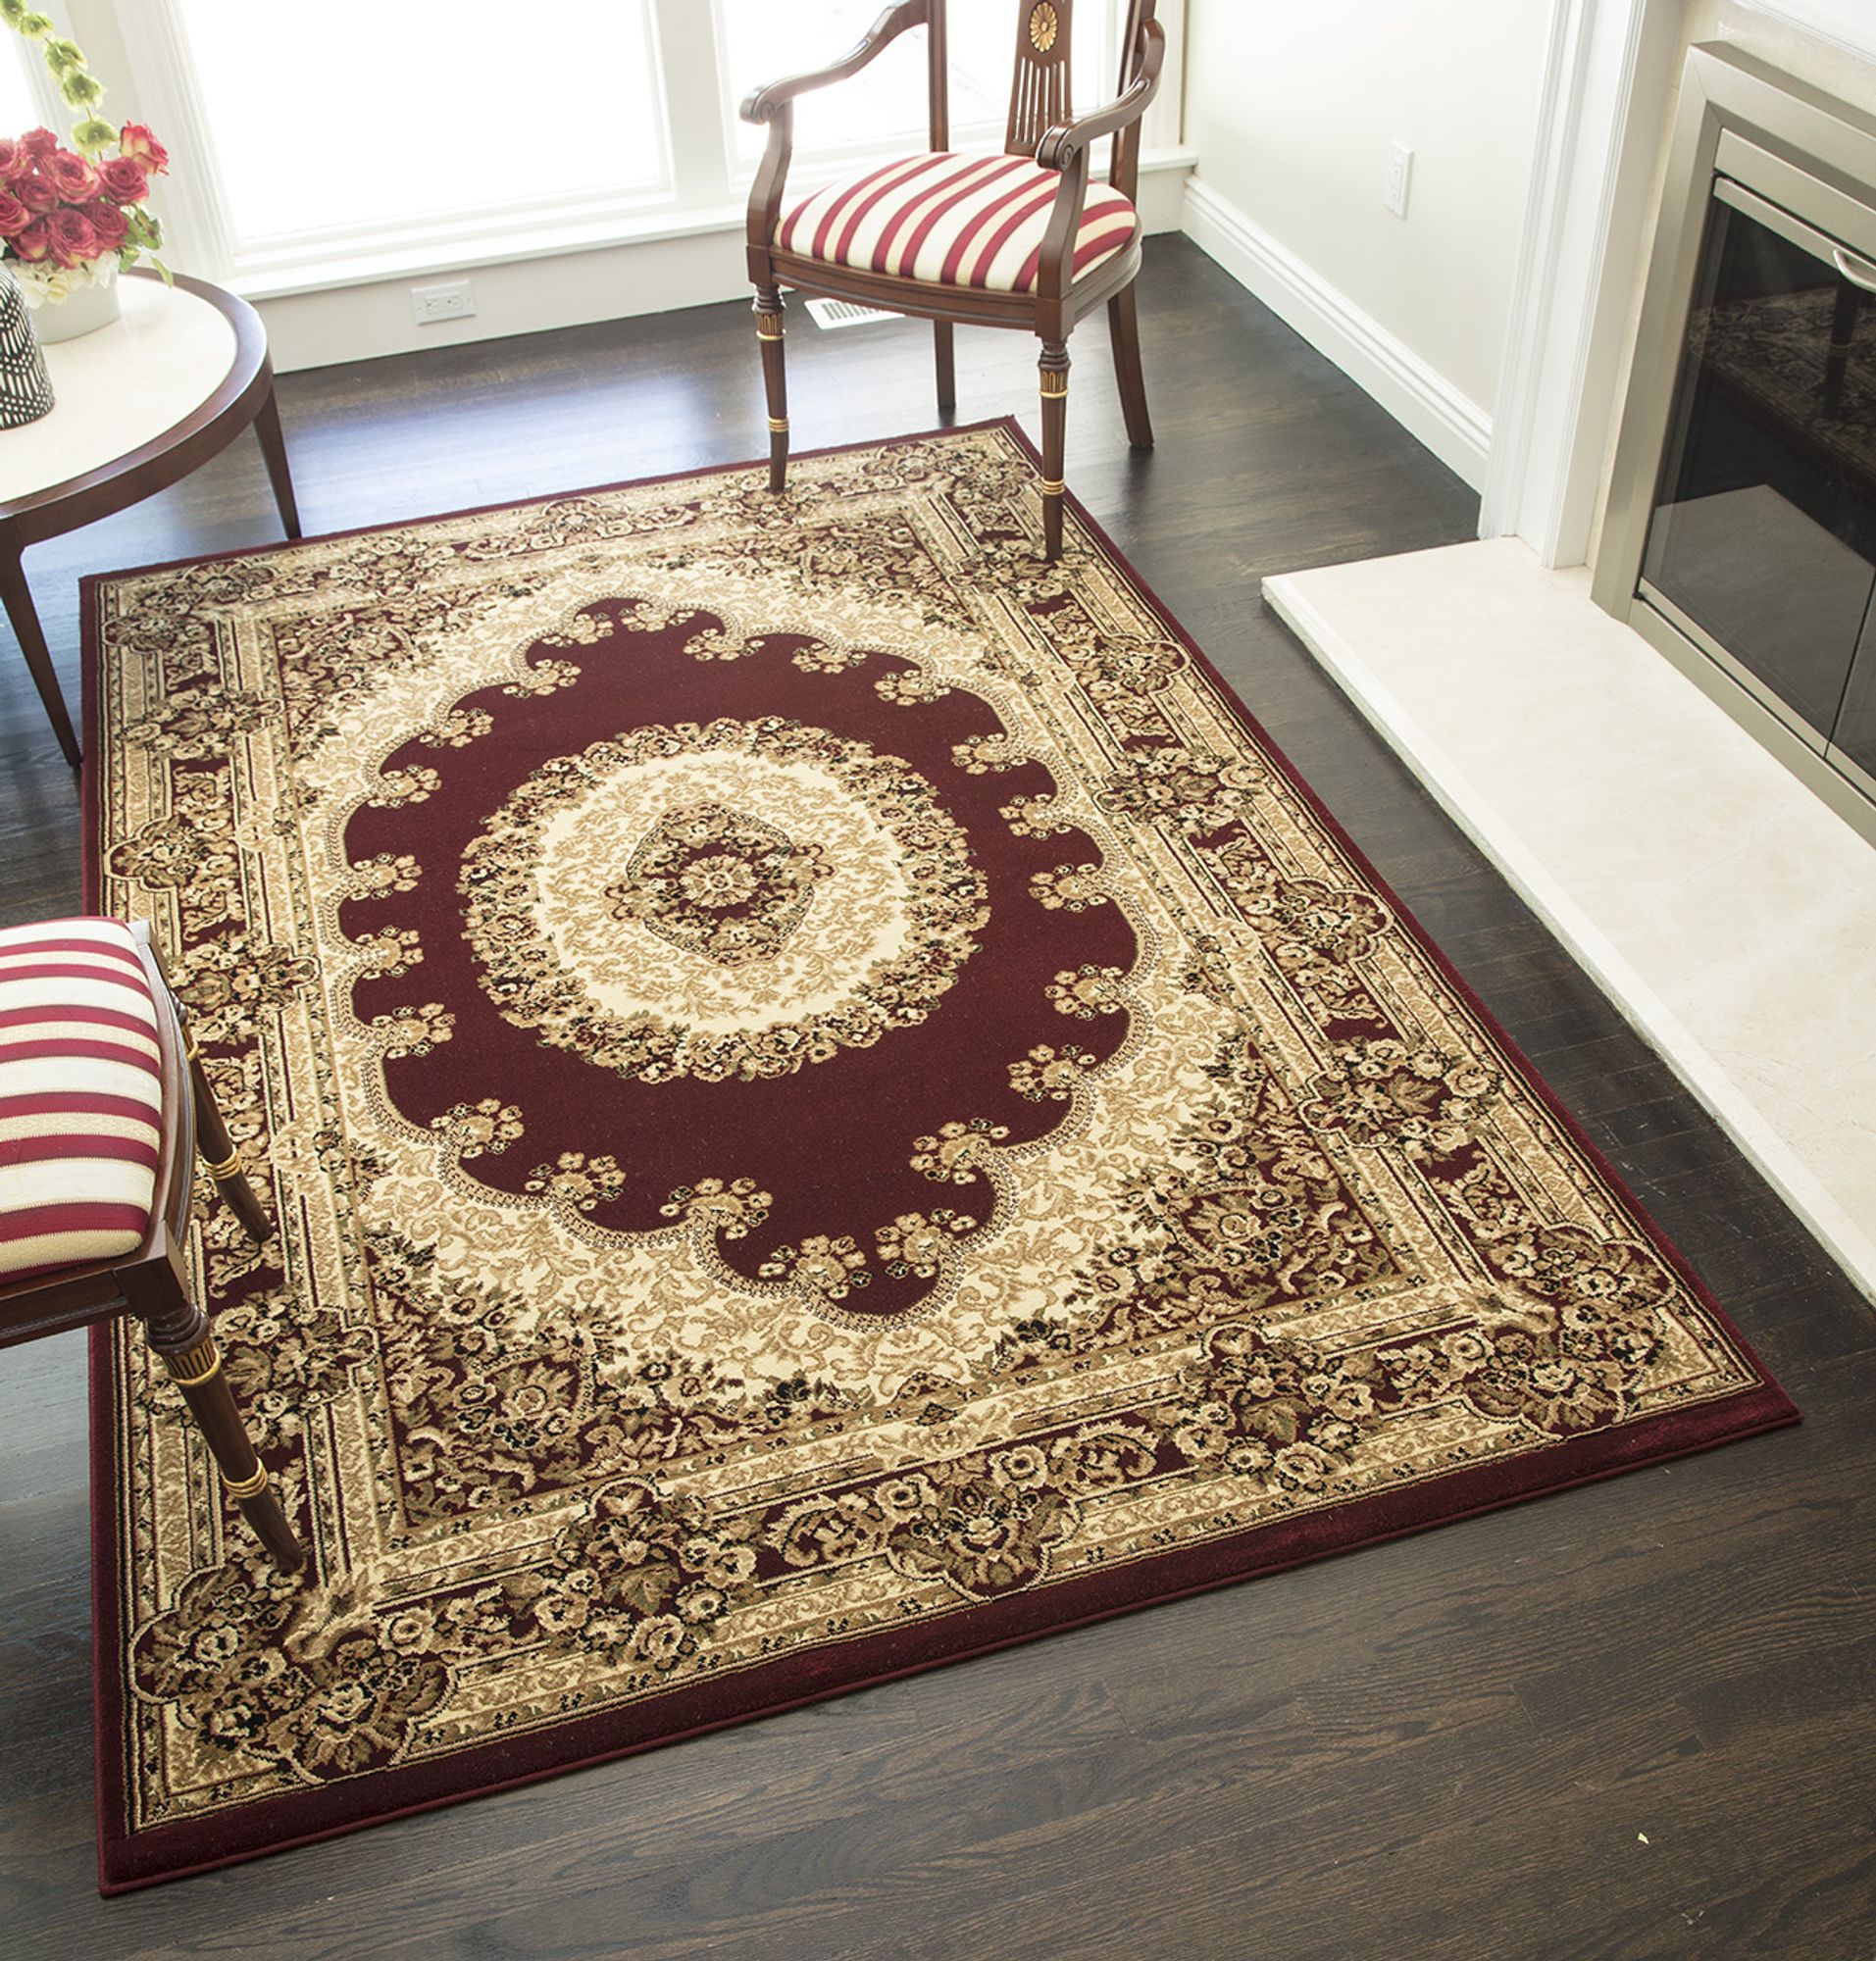 Rugs America Vista 807-RED Kerman Red Oriental Traditional Red Area Rug, 2'3"x7'10" - image 1 of 3